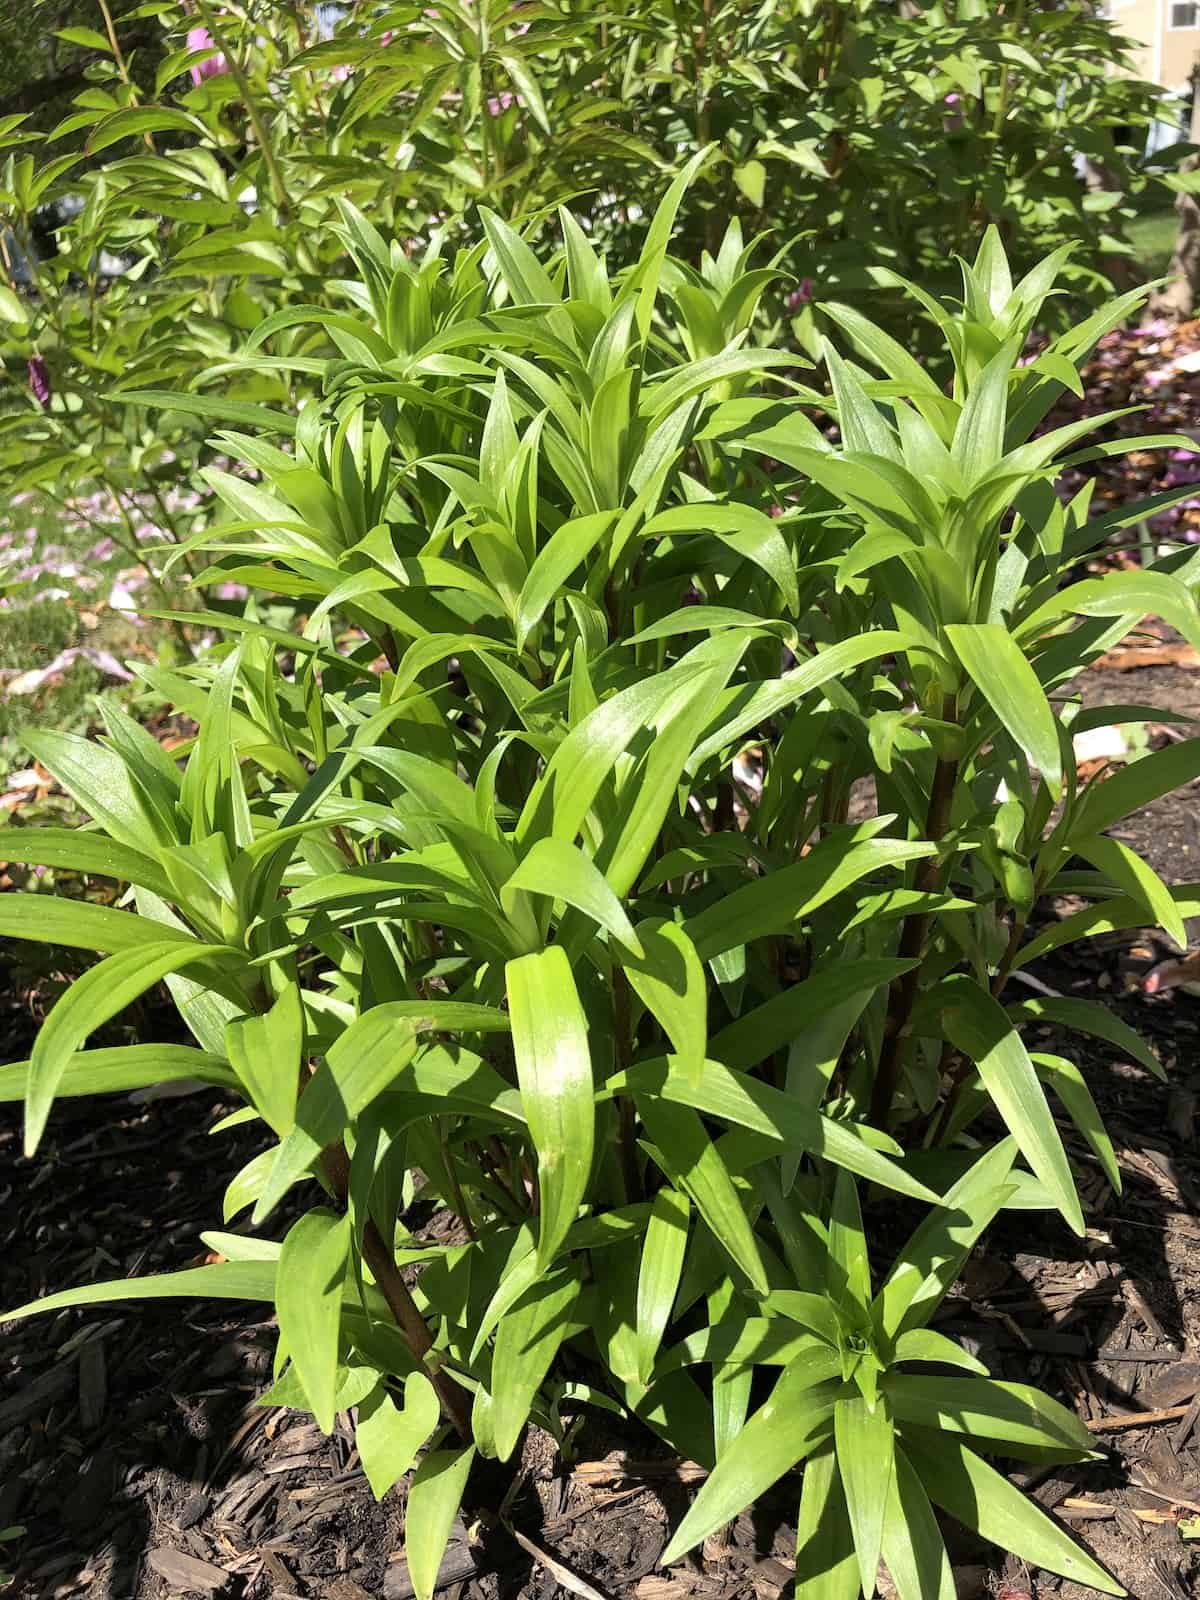 Asiatic lily foliage in may before blooming